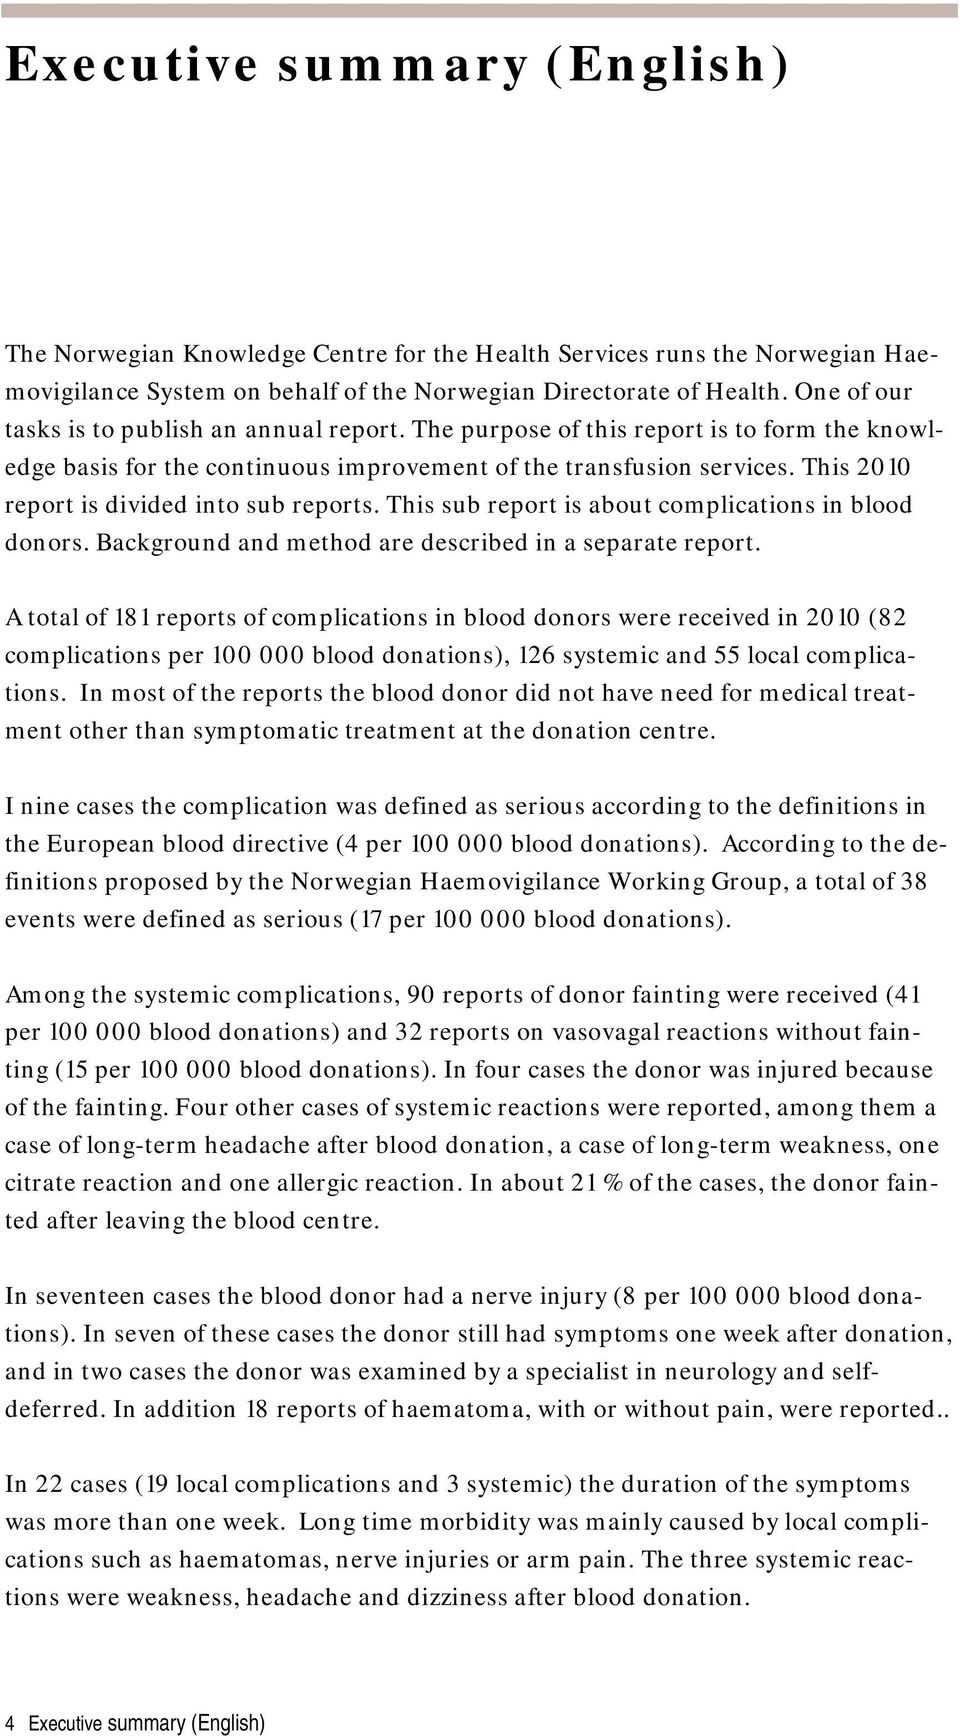 This 2010 report is divided into sub reports. This sub report is about complications in blood donors. Background and method are described in a separate report.